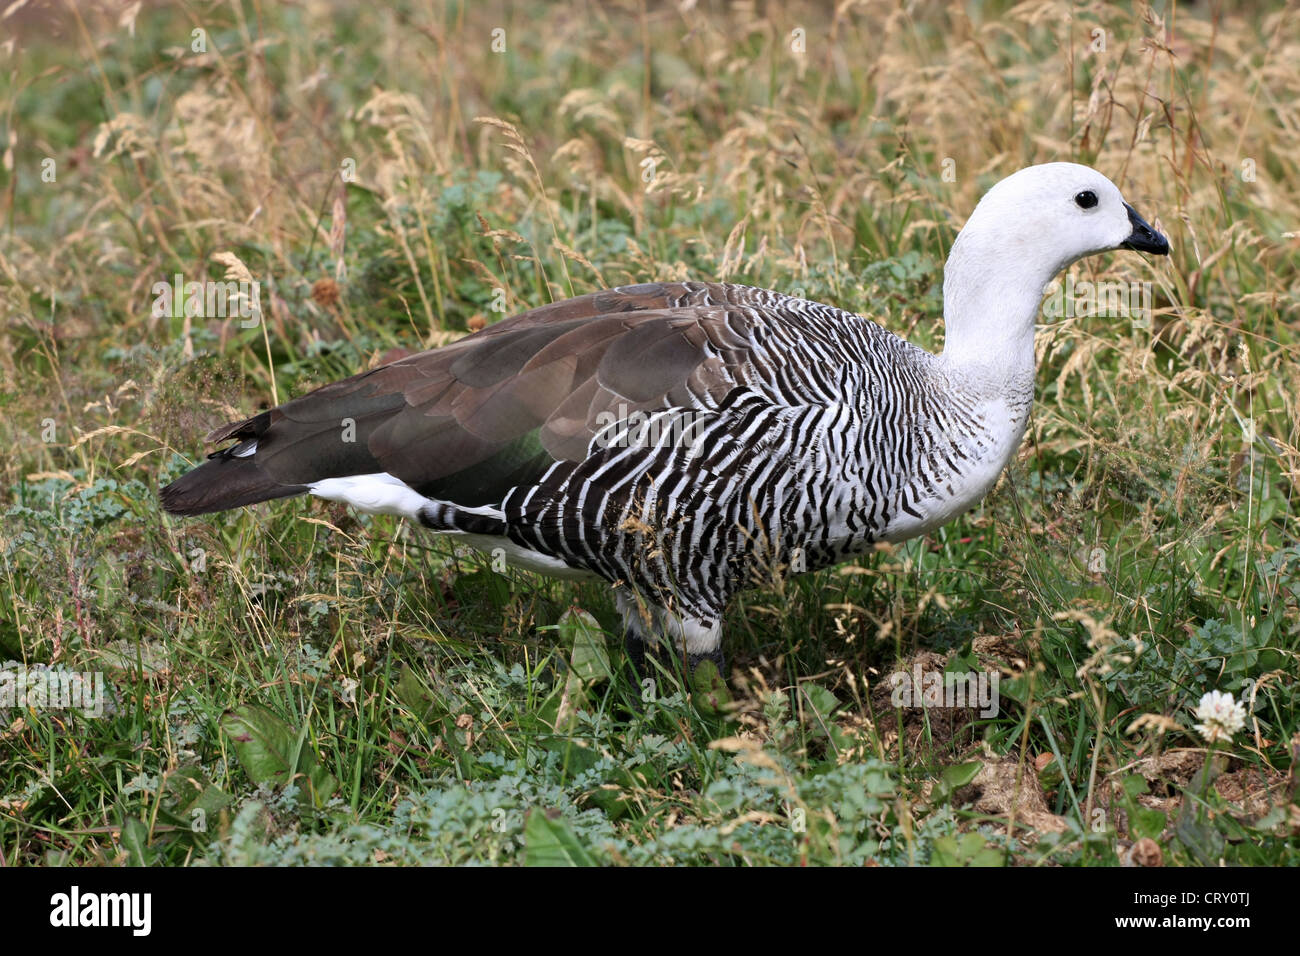 An Upland Goose, standing in the ground cover north of the Beagle Channel and west of Ushuaia, Tierra del Fuego, Argentina Stock Photo